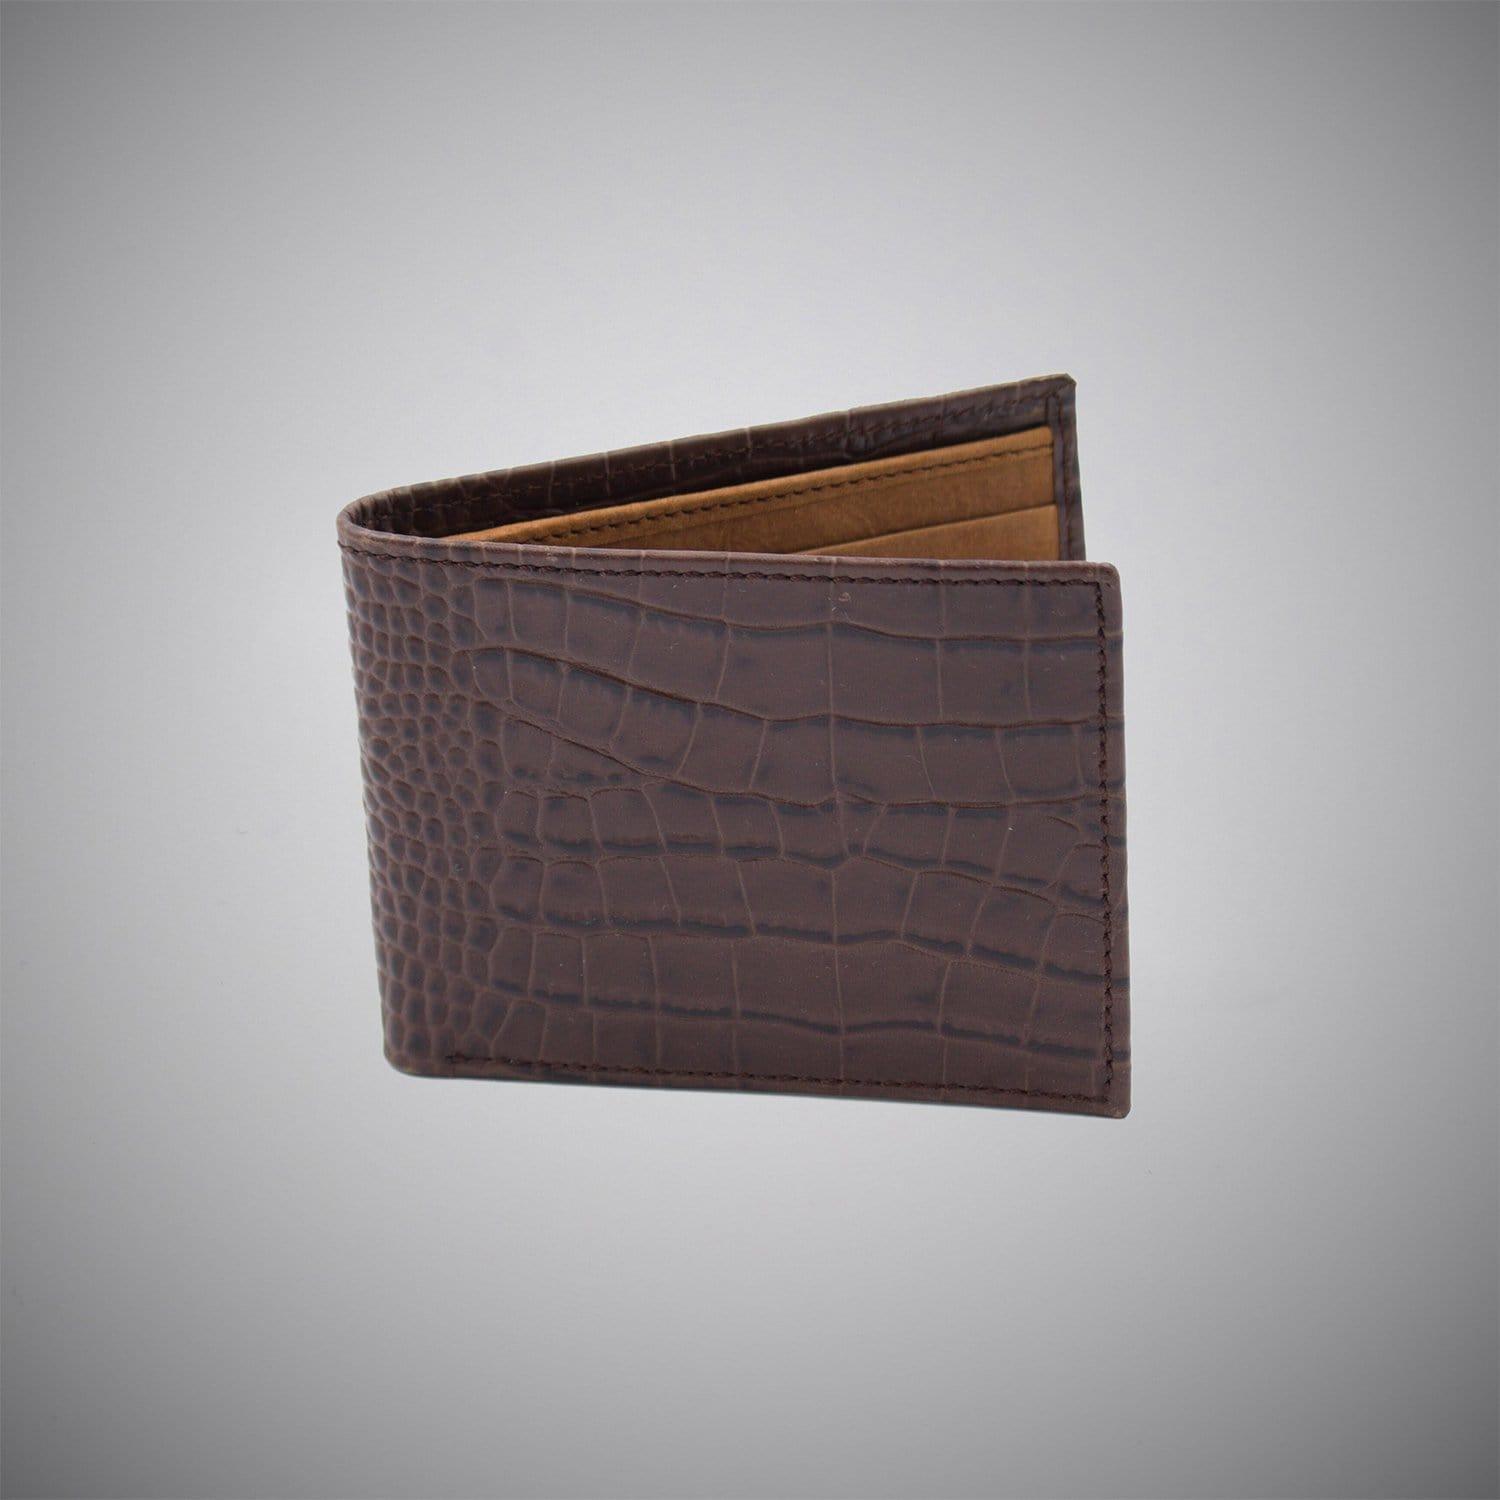 Chocolate Crocodile Embossed Calf Leather Wallet With Tan Suede Interior - Just White Shirts